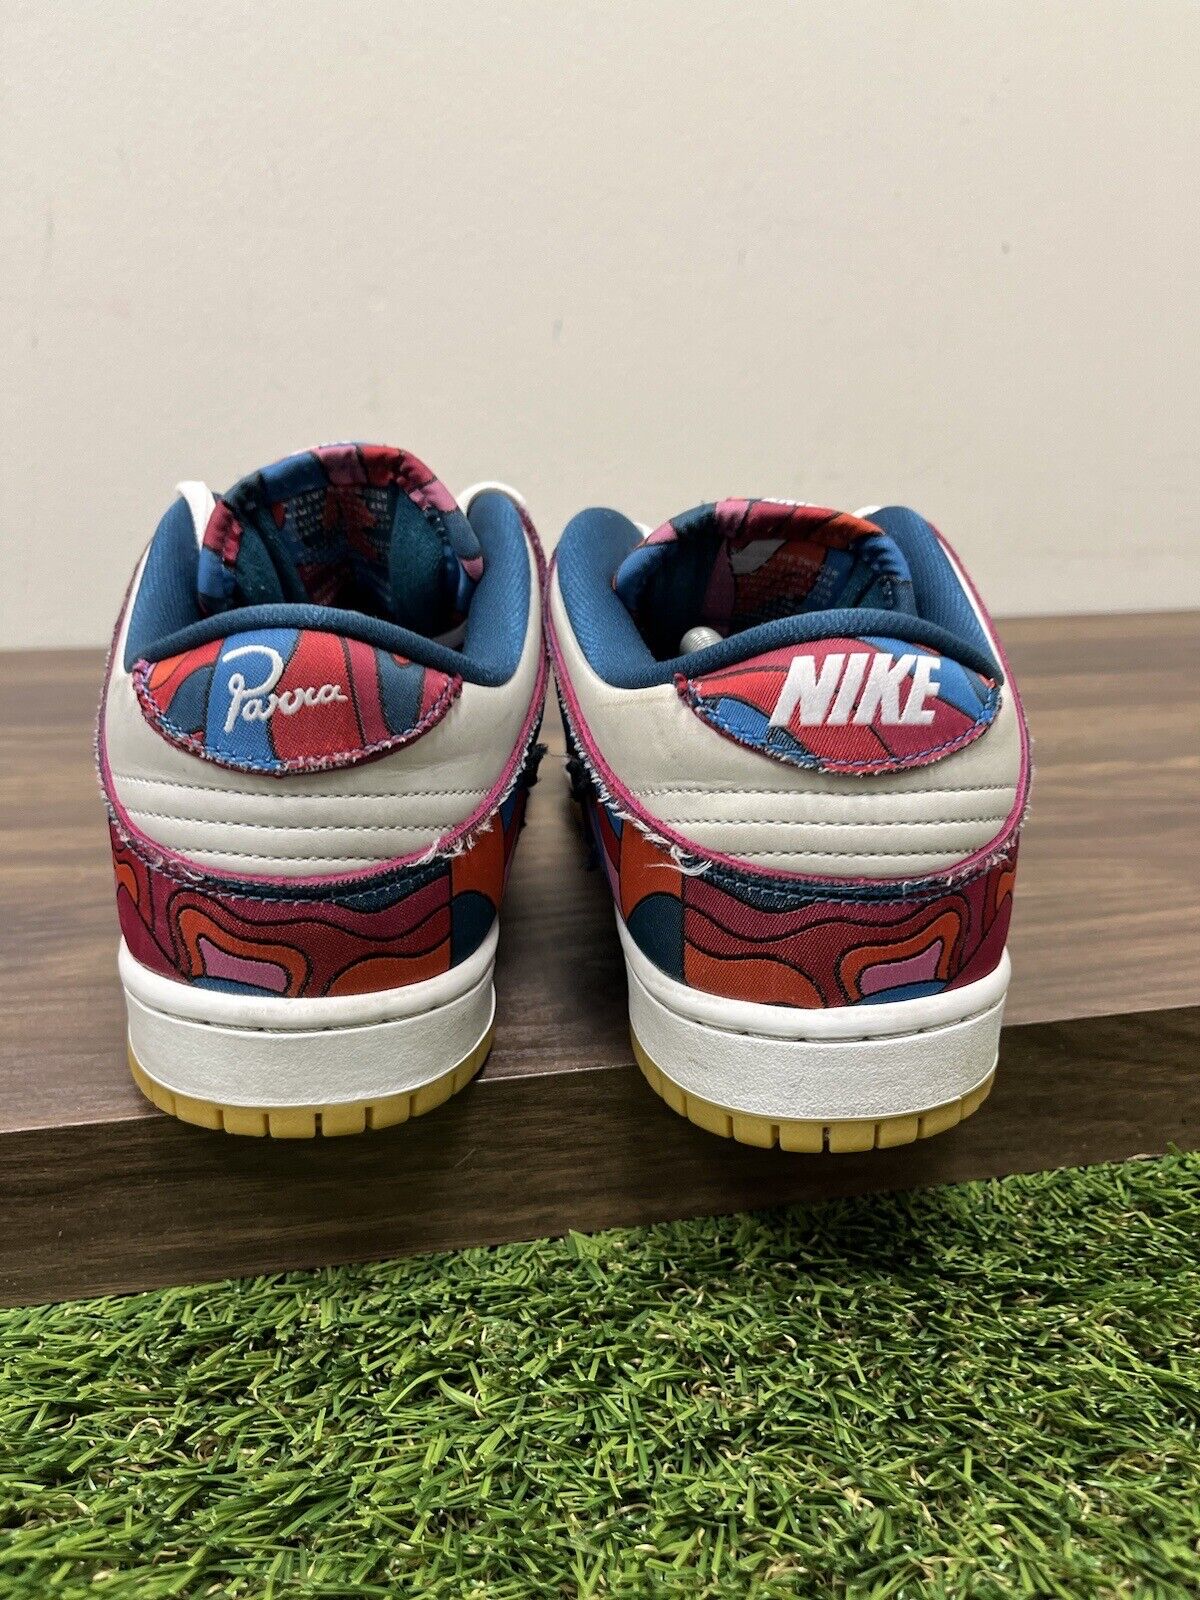 Nike Dunk Low Pro SB x Parra ‘Abstract Art’ Size 11